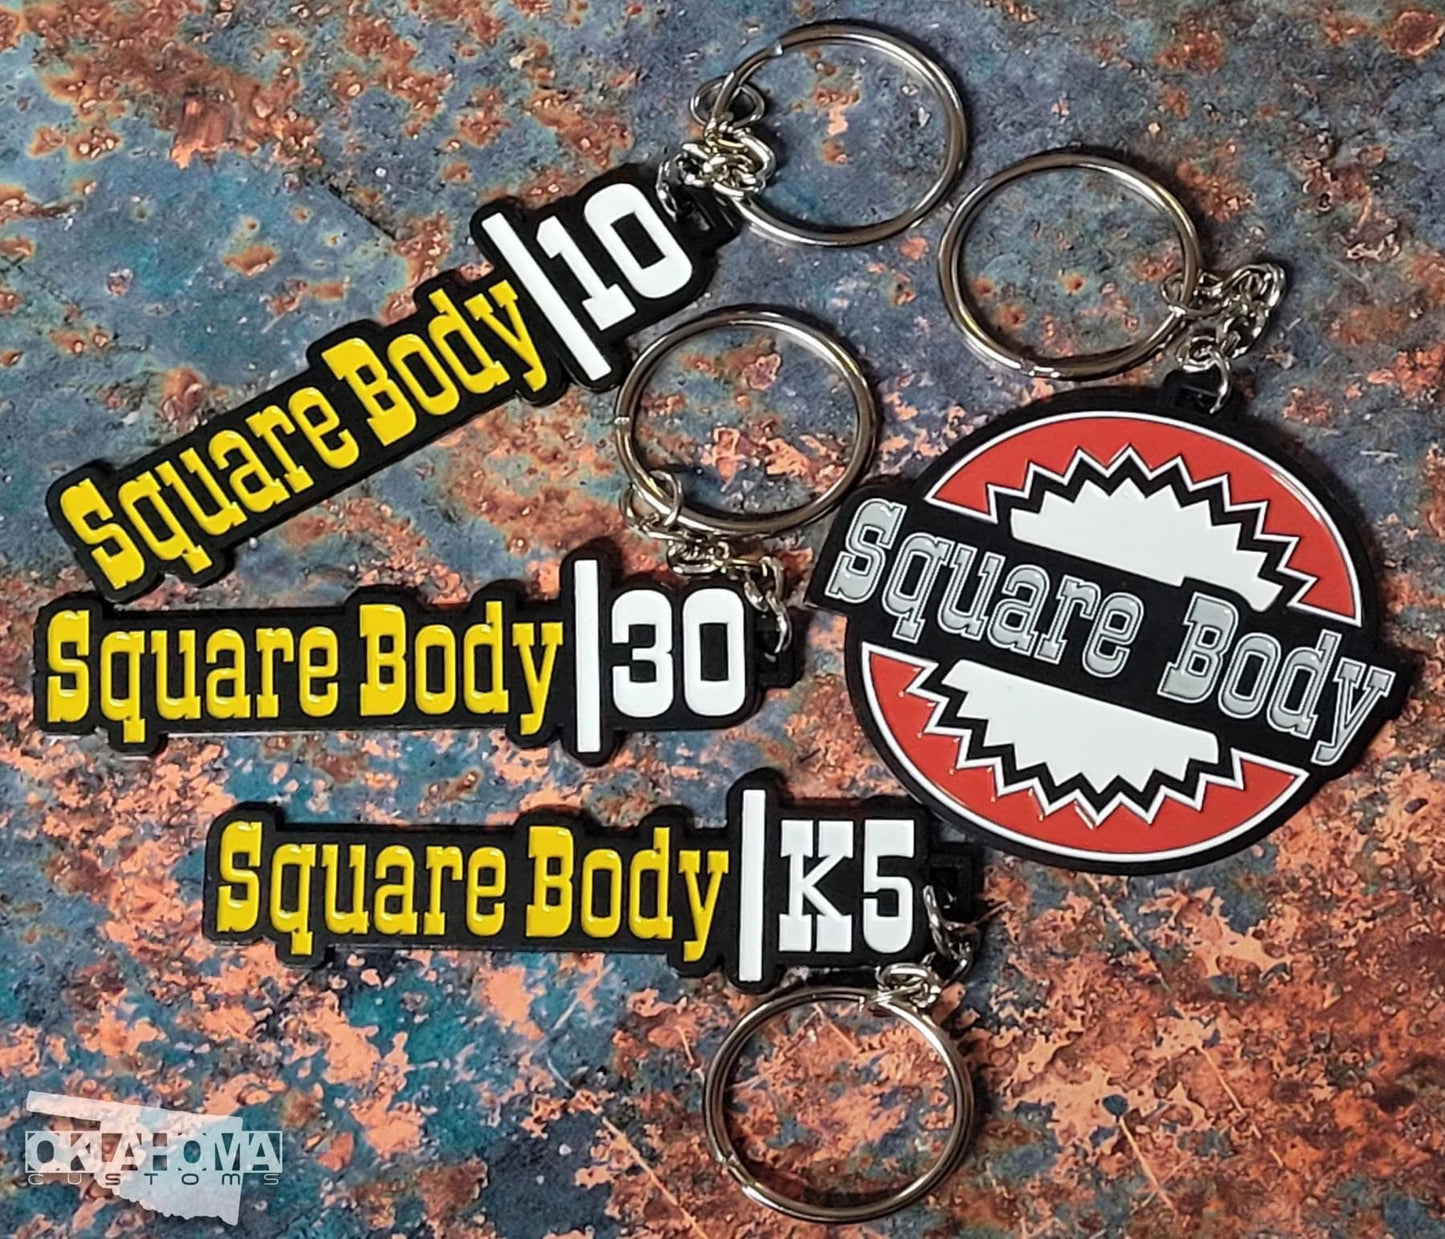 Chevy GMC Square Body K5 Metal Keychain - Handcrafted Stamped Enamel Painted Keyring for Car Lovers